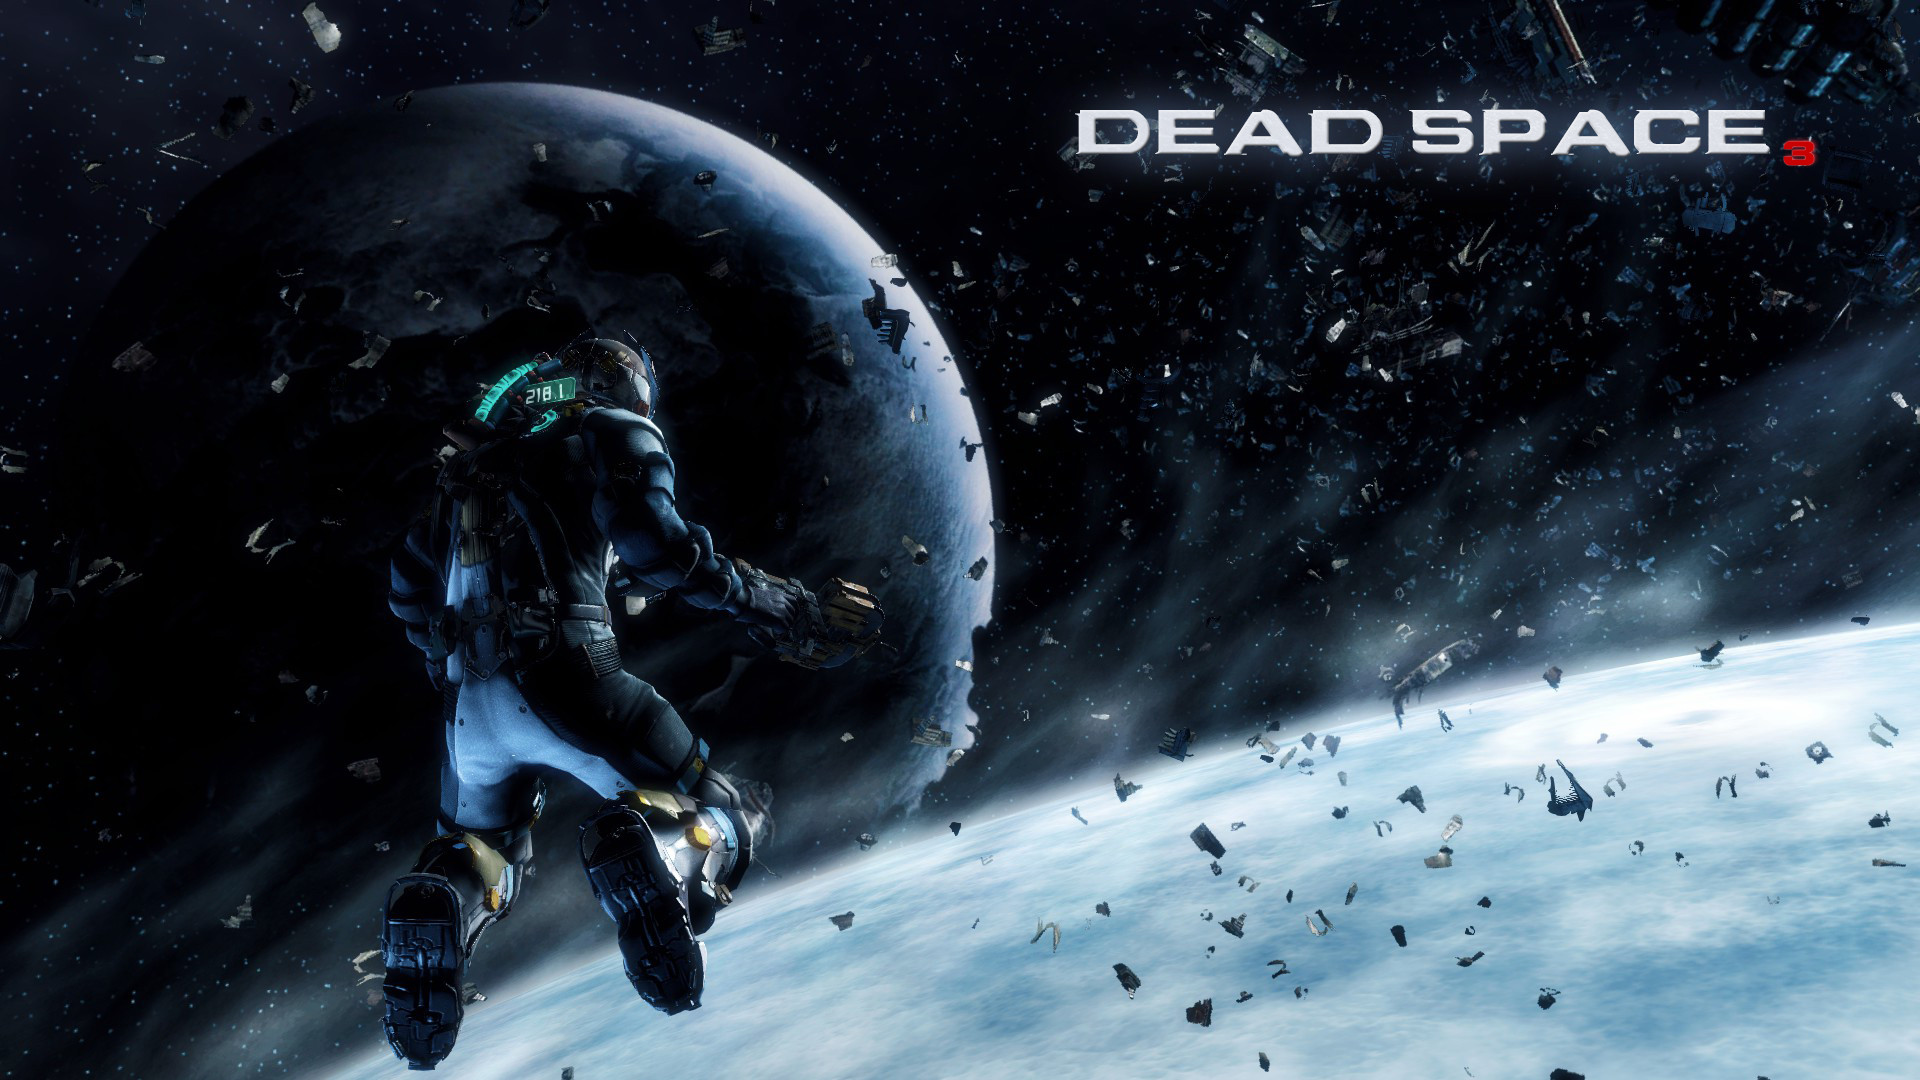 Made A Dead Space Wallpaper I